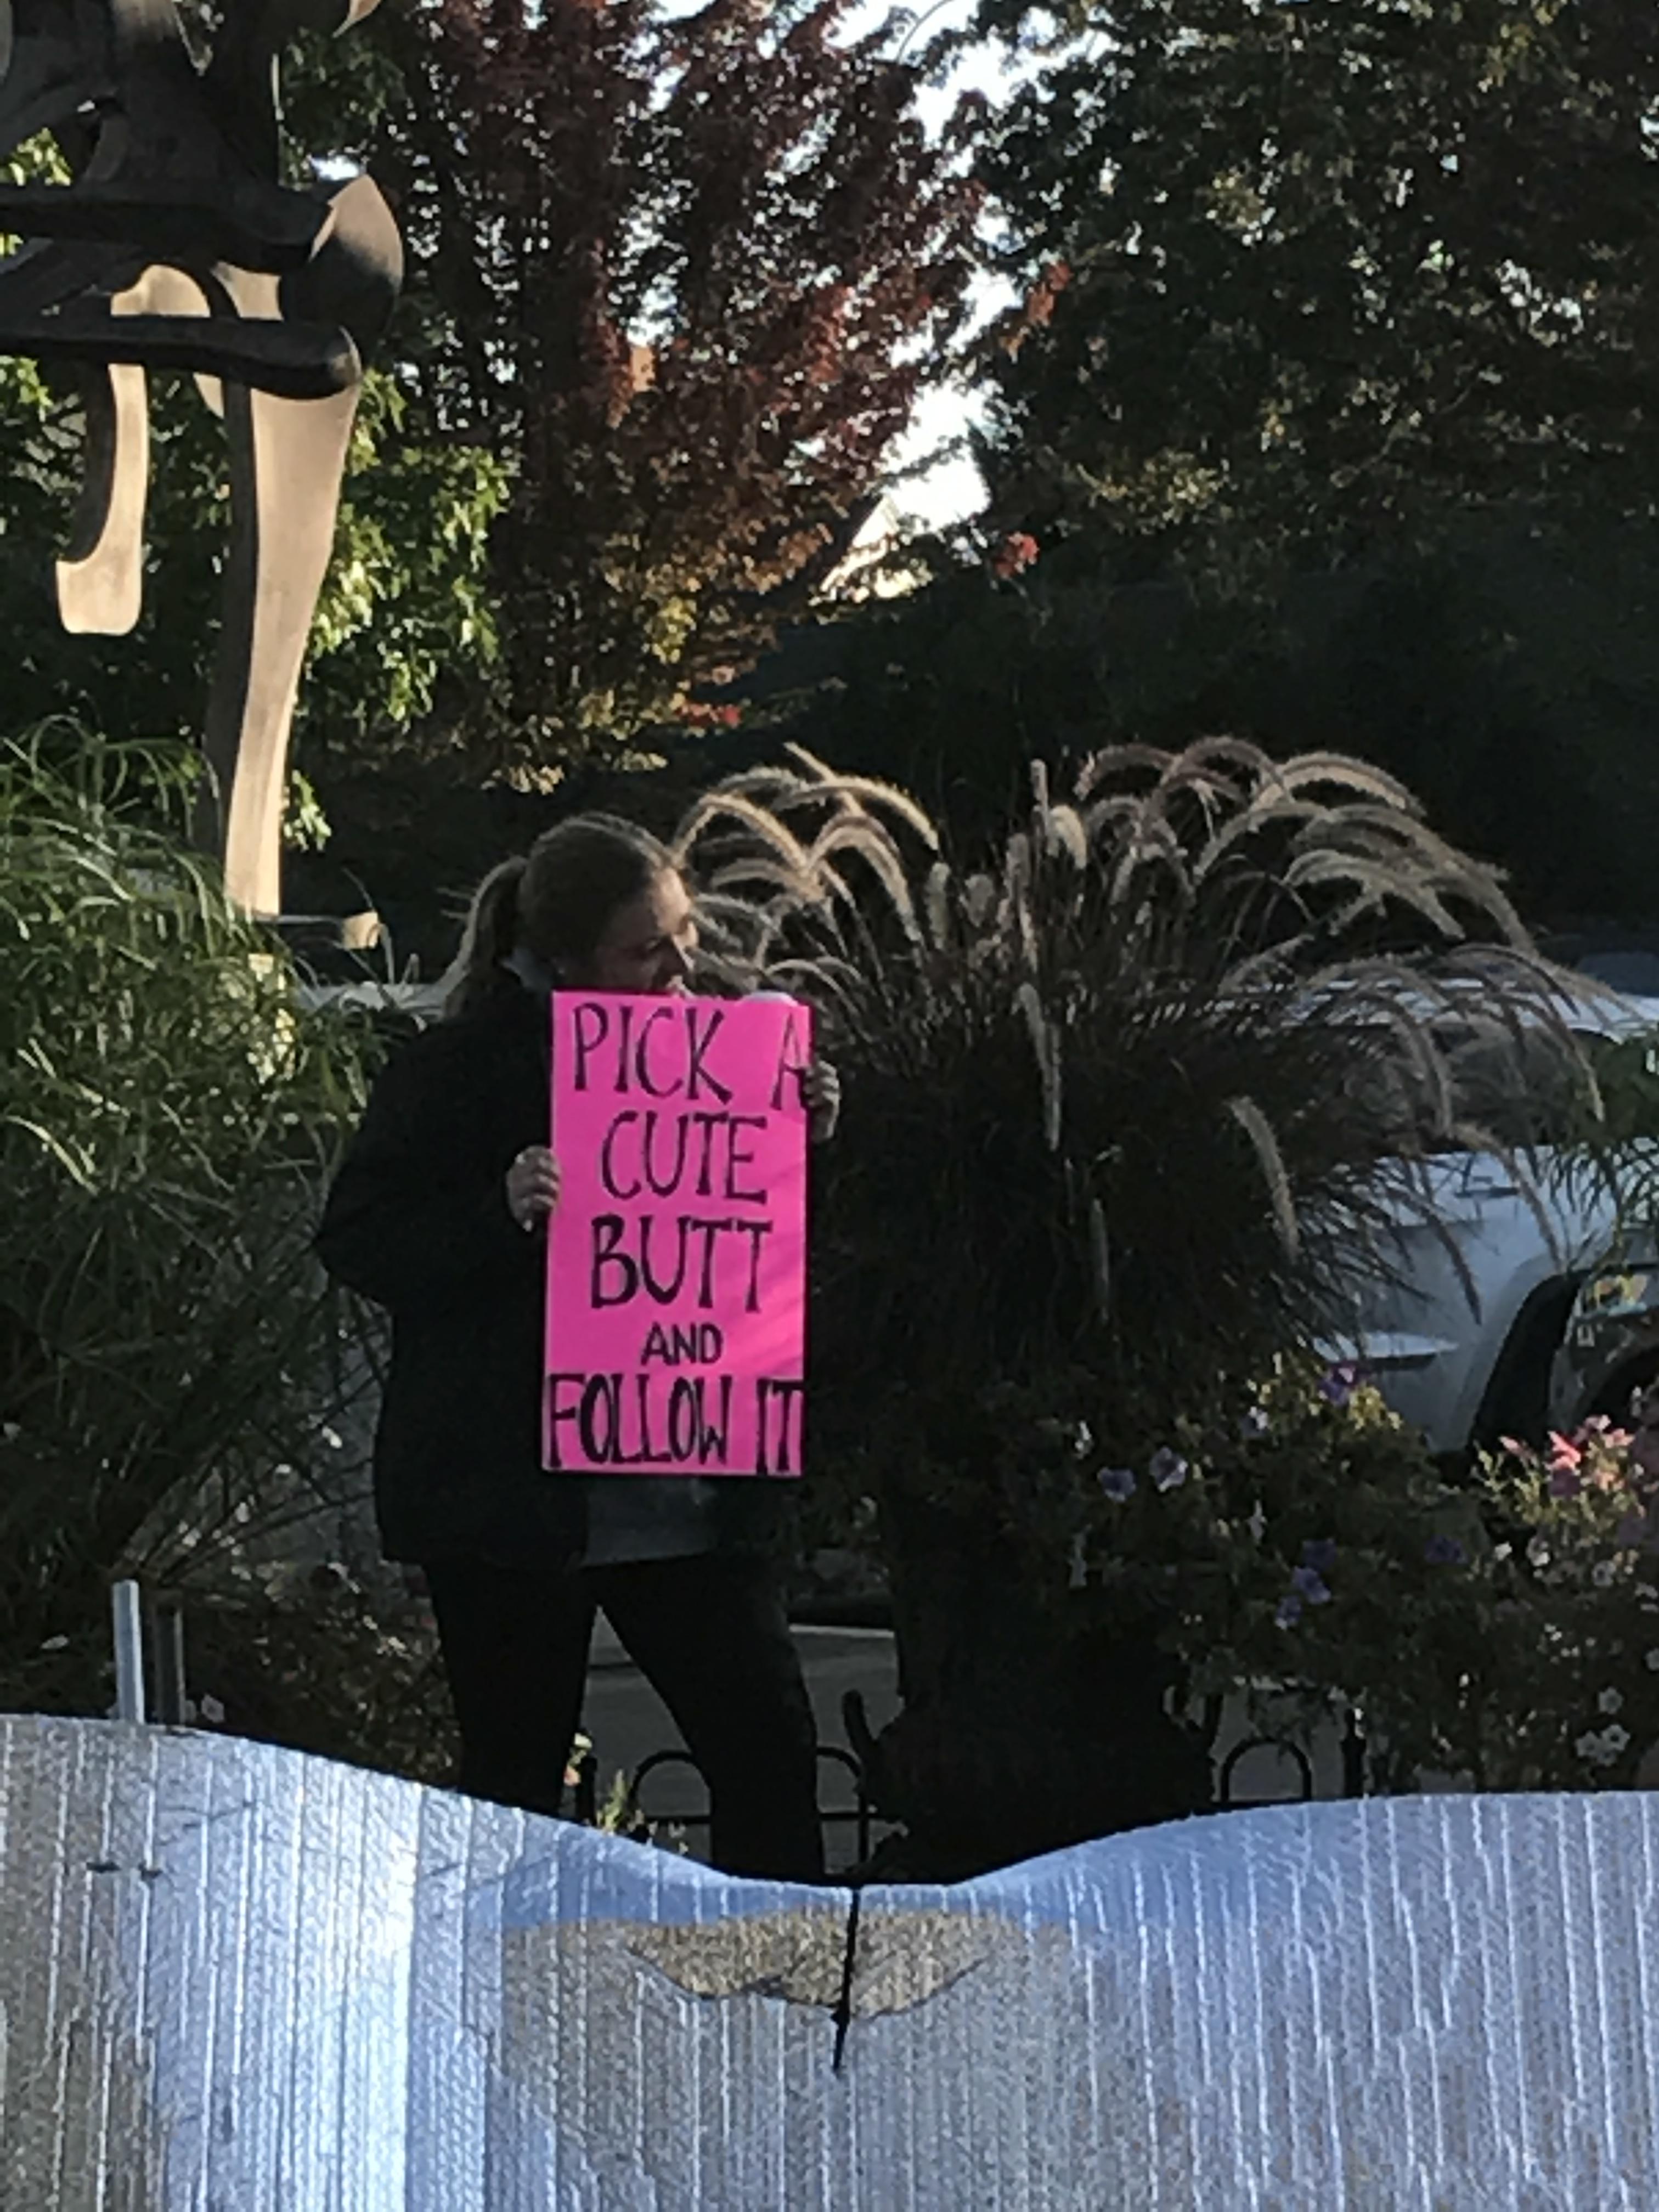 Girl holding a sign saying to pick a cute butt and follow it.